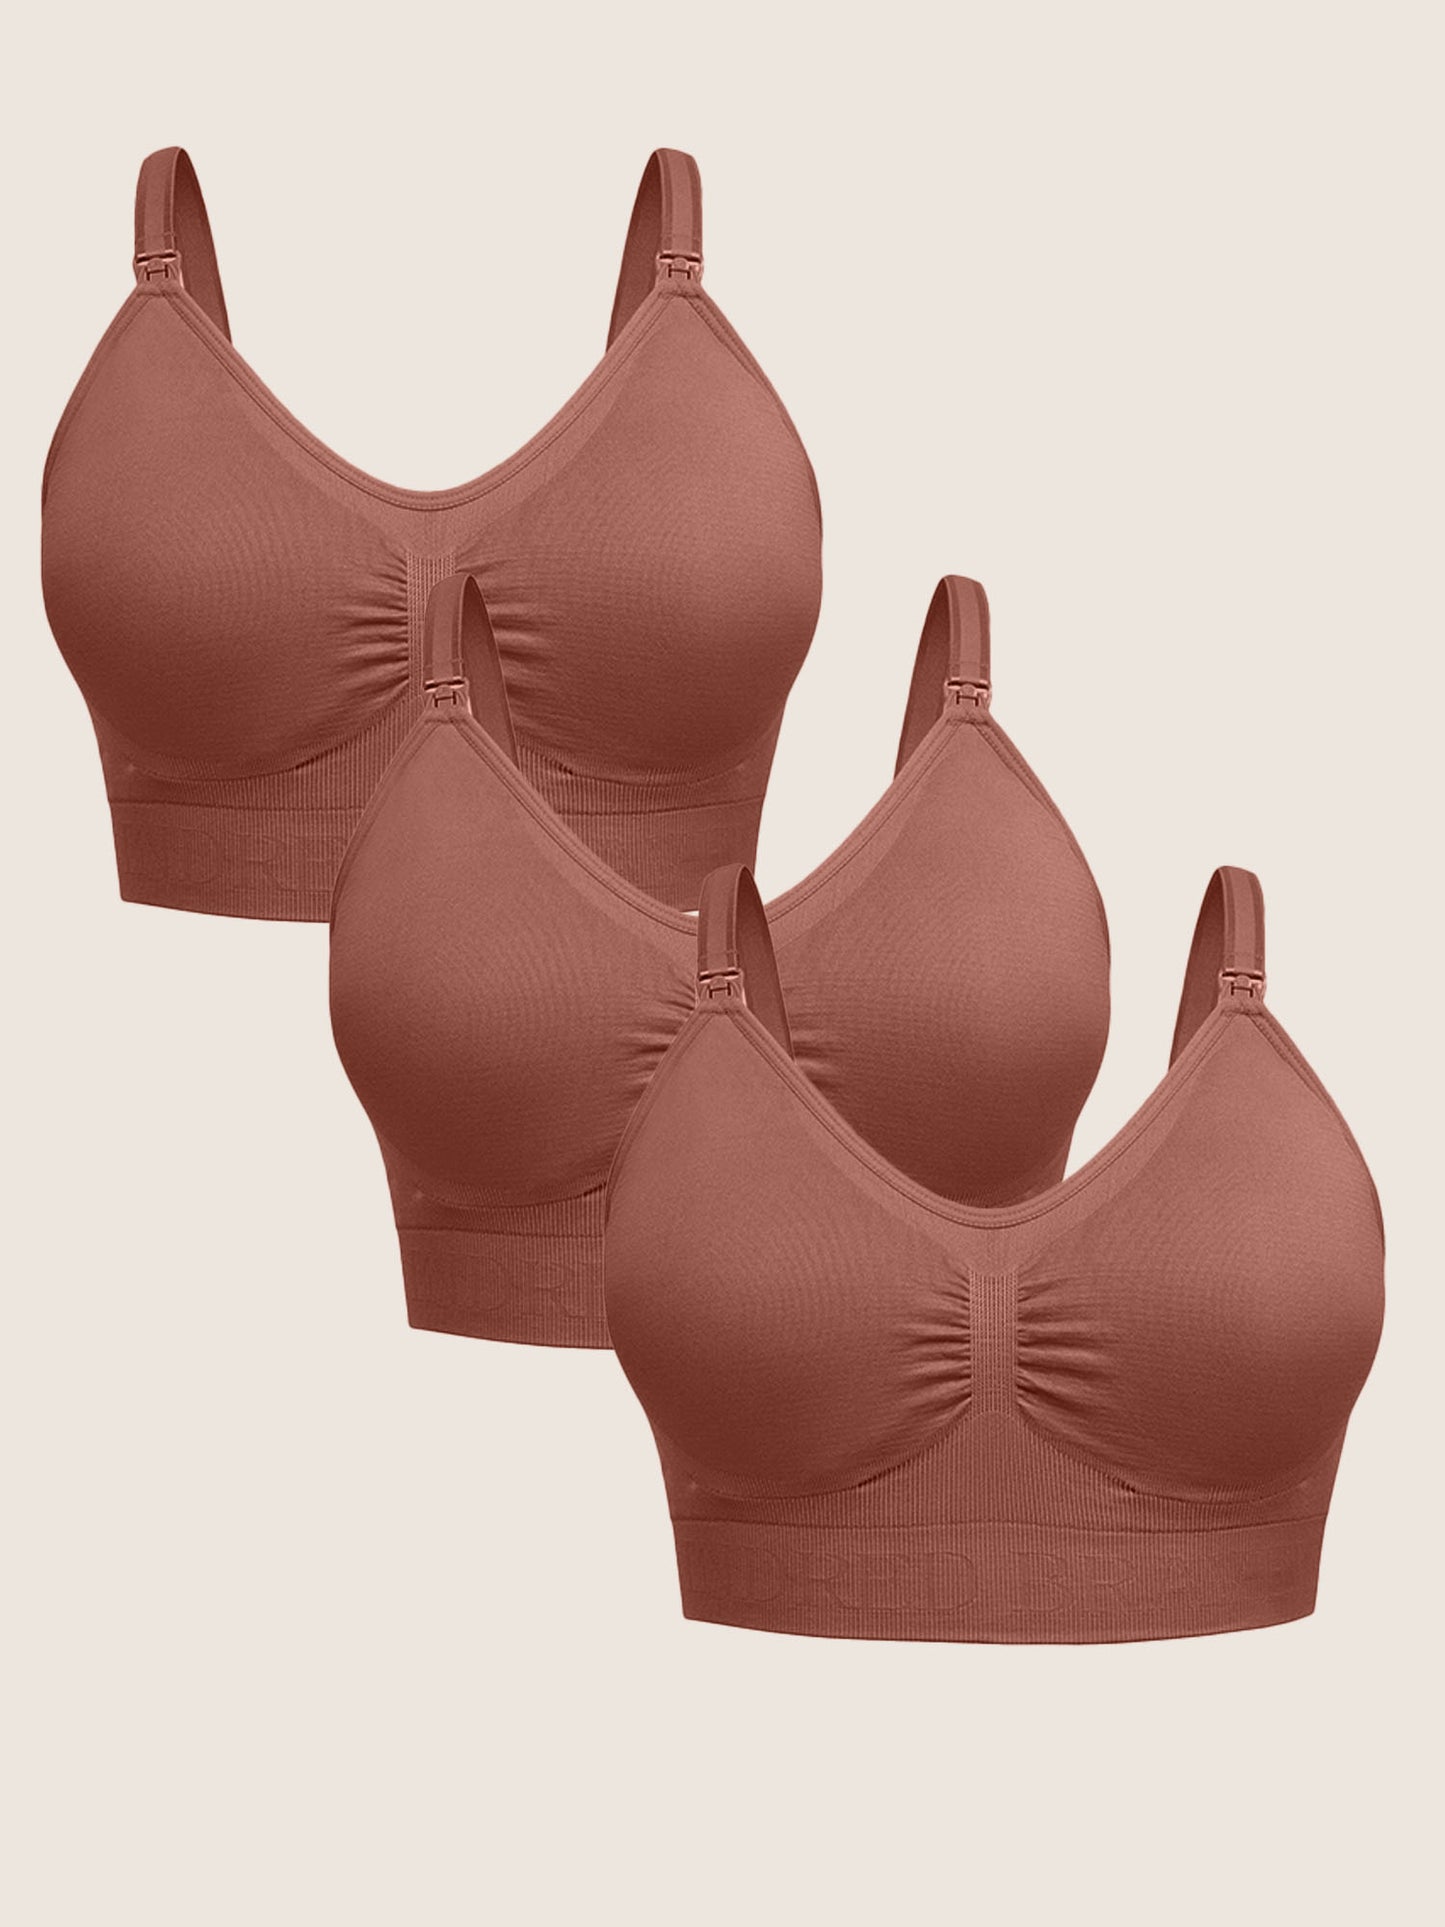 Sunveno Maternity Cross-Fit Nursing & Sleep Bra (L) - Brown, Brown, L: Buy  Online at Best Price in Egypt - Souq is now